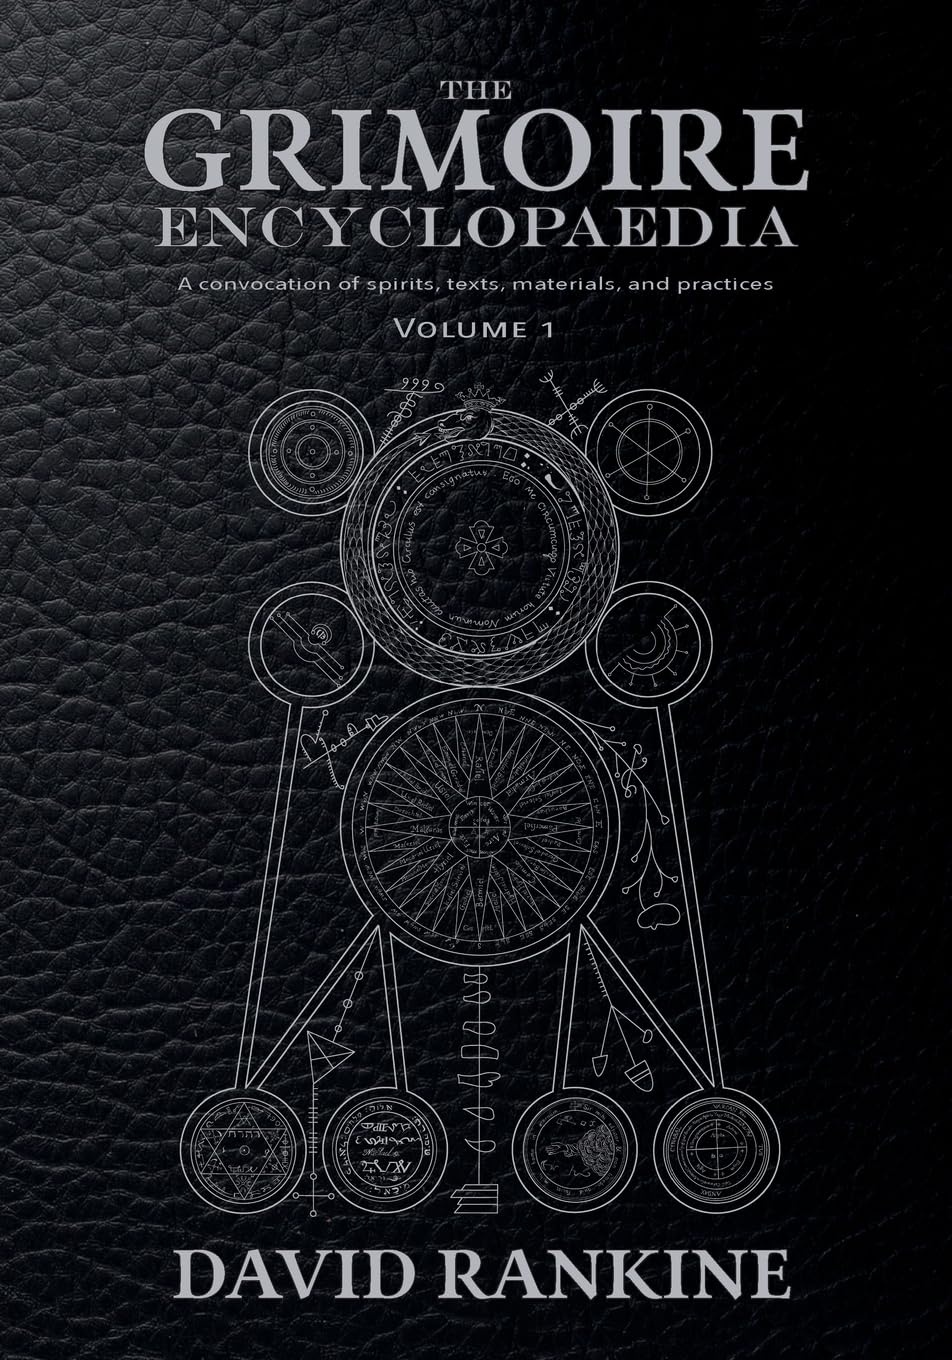 The Grimoire Encyclopaedia: Volume 1: A Convocation of Spirits